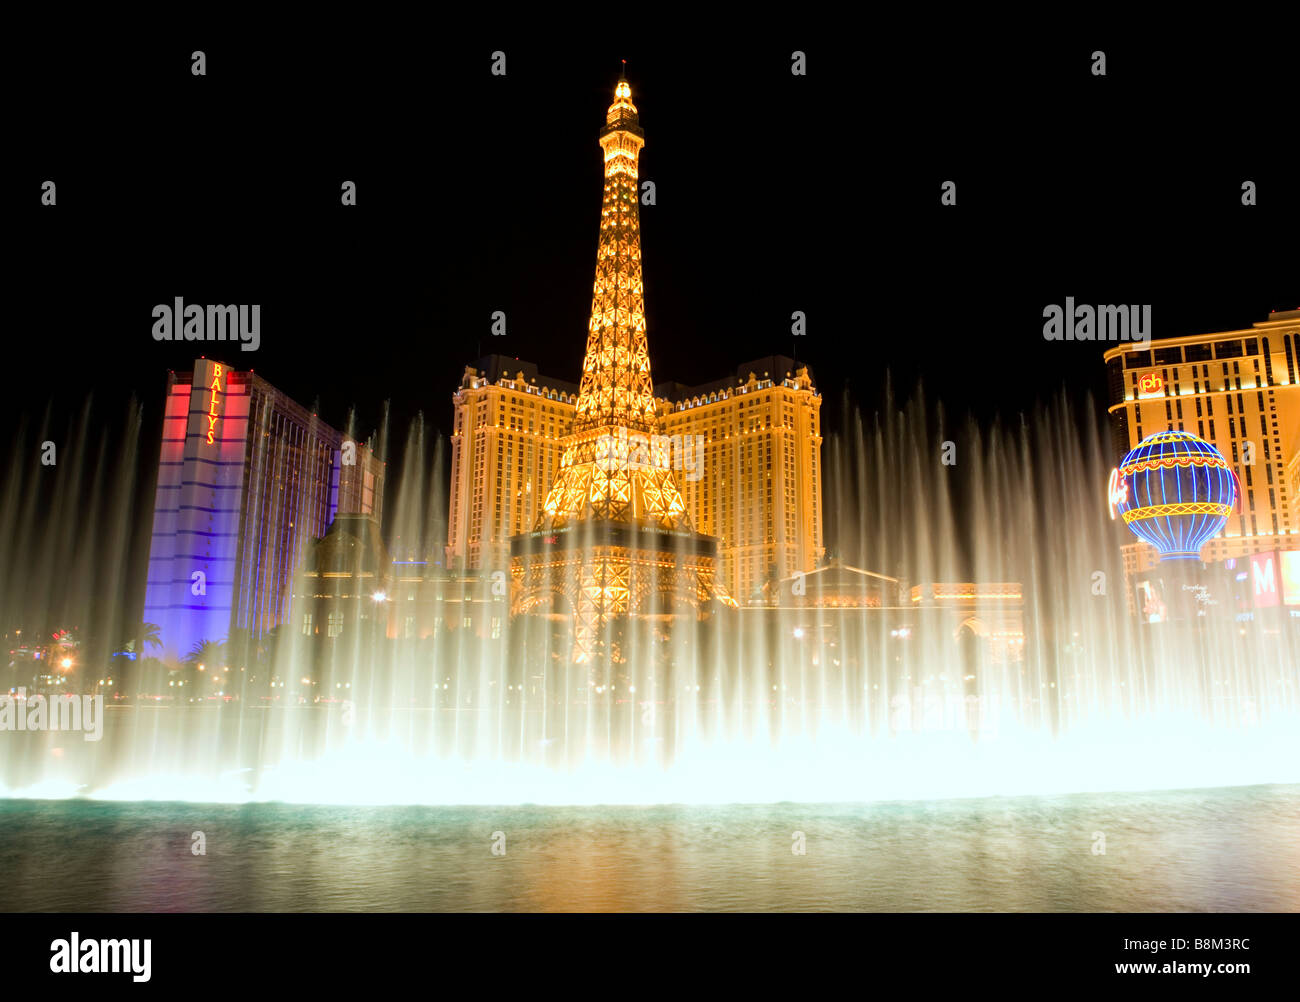 Bellagio Fountains with the Paris and Bally's casino & hotel in the Background at night on the Las Vegas strip, Nevada, USA Stock Photo